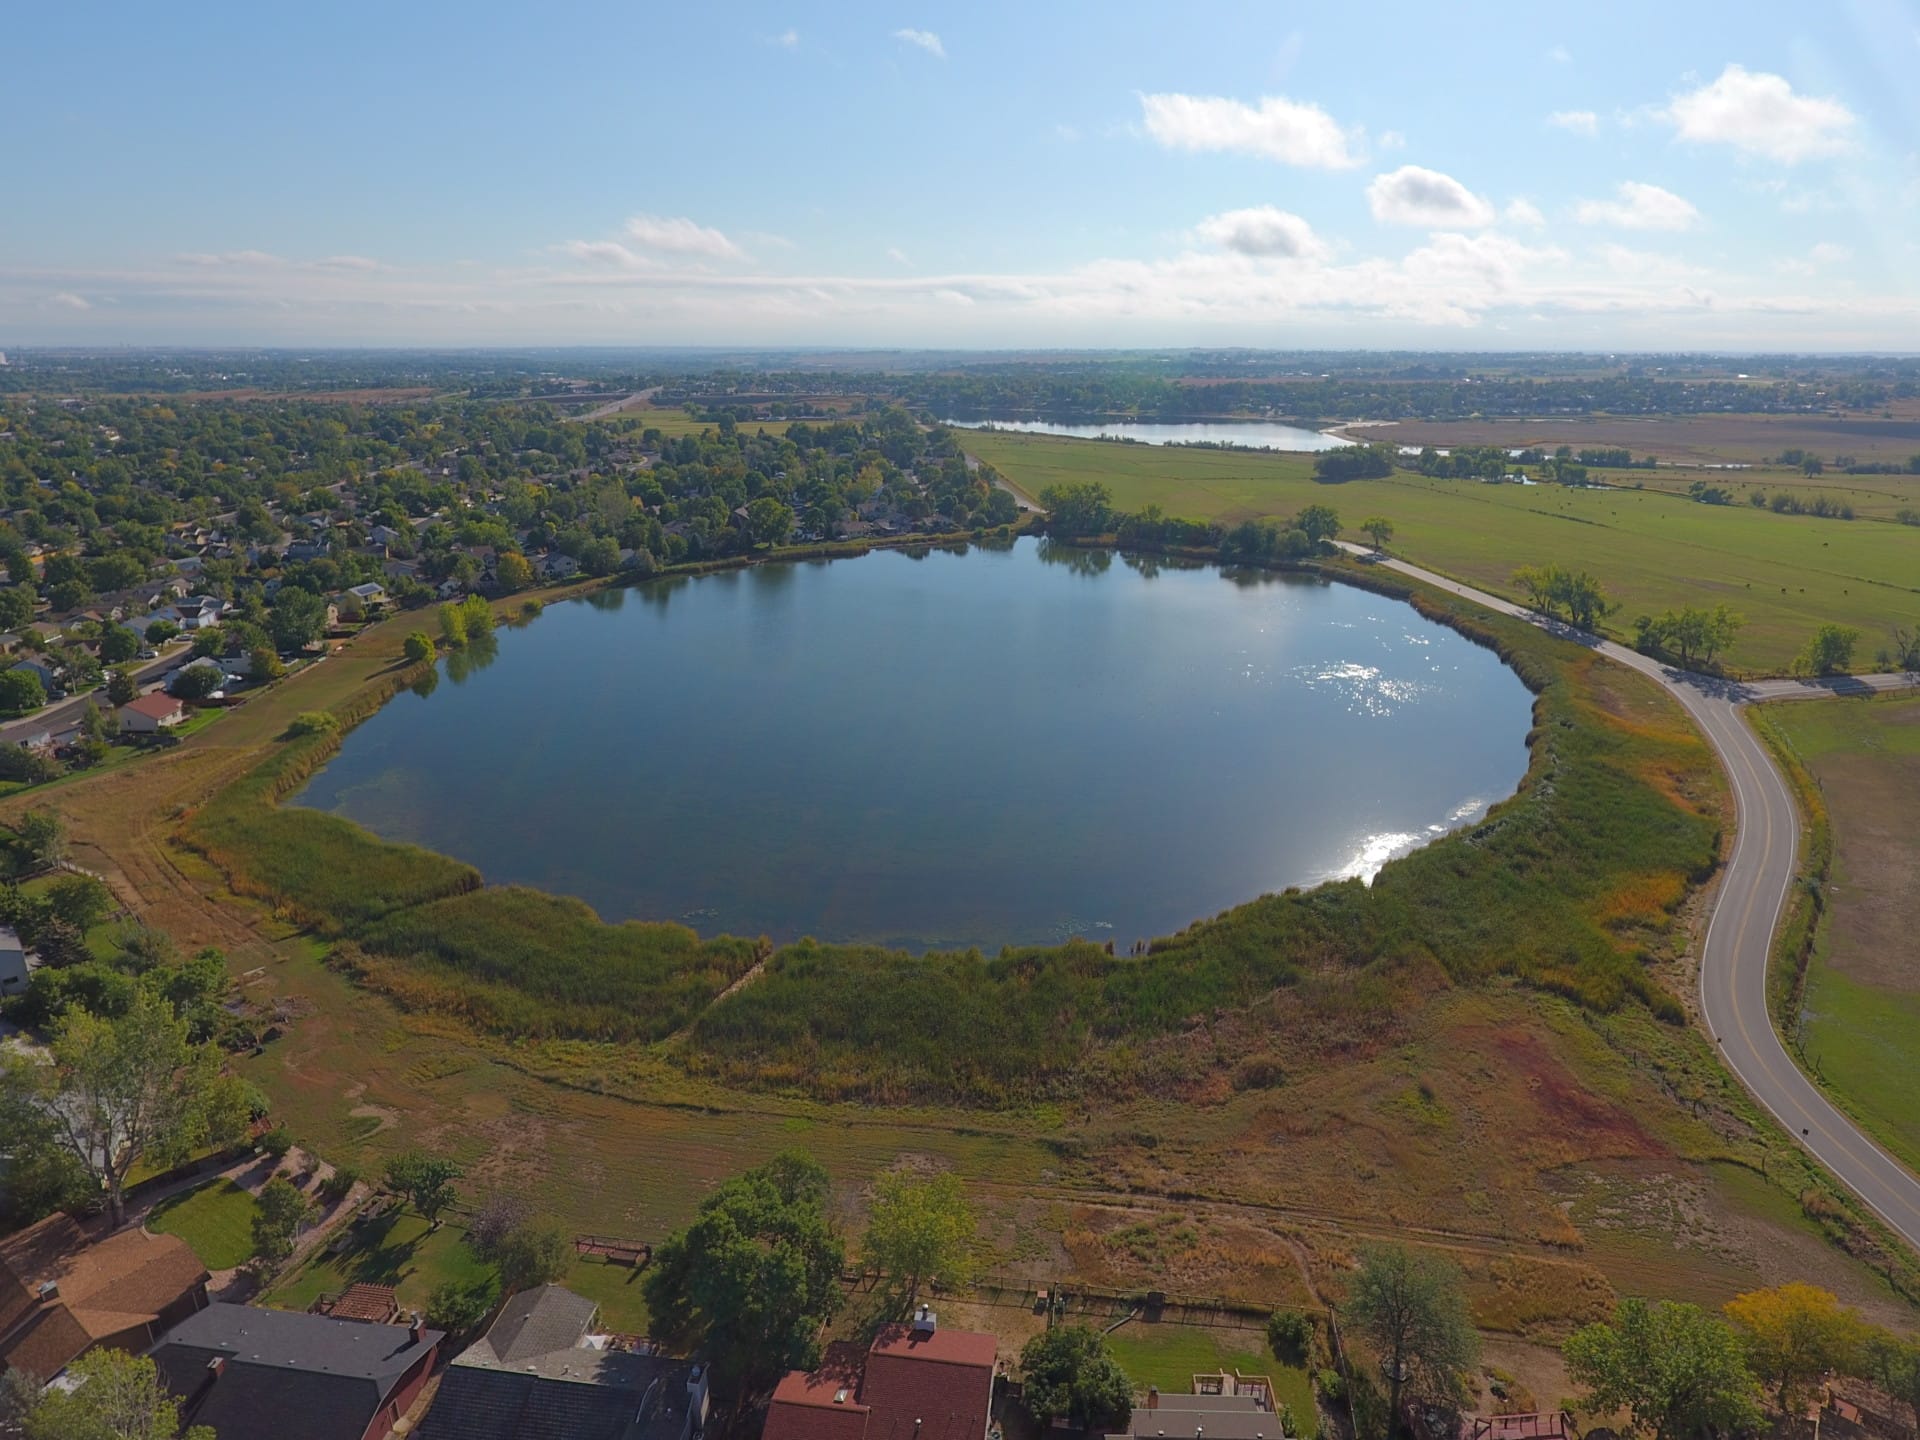 land only property for sale colorado cattail pond